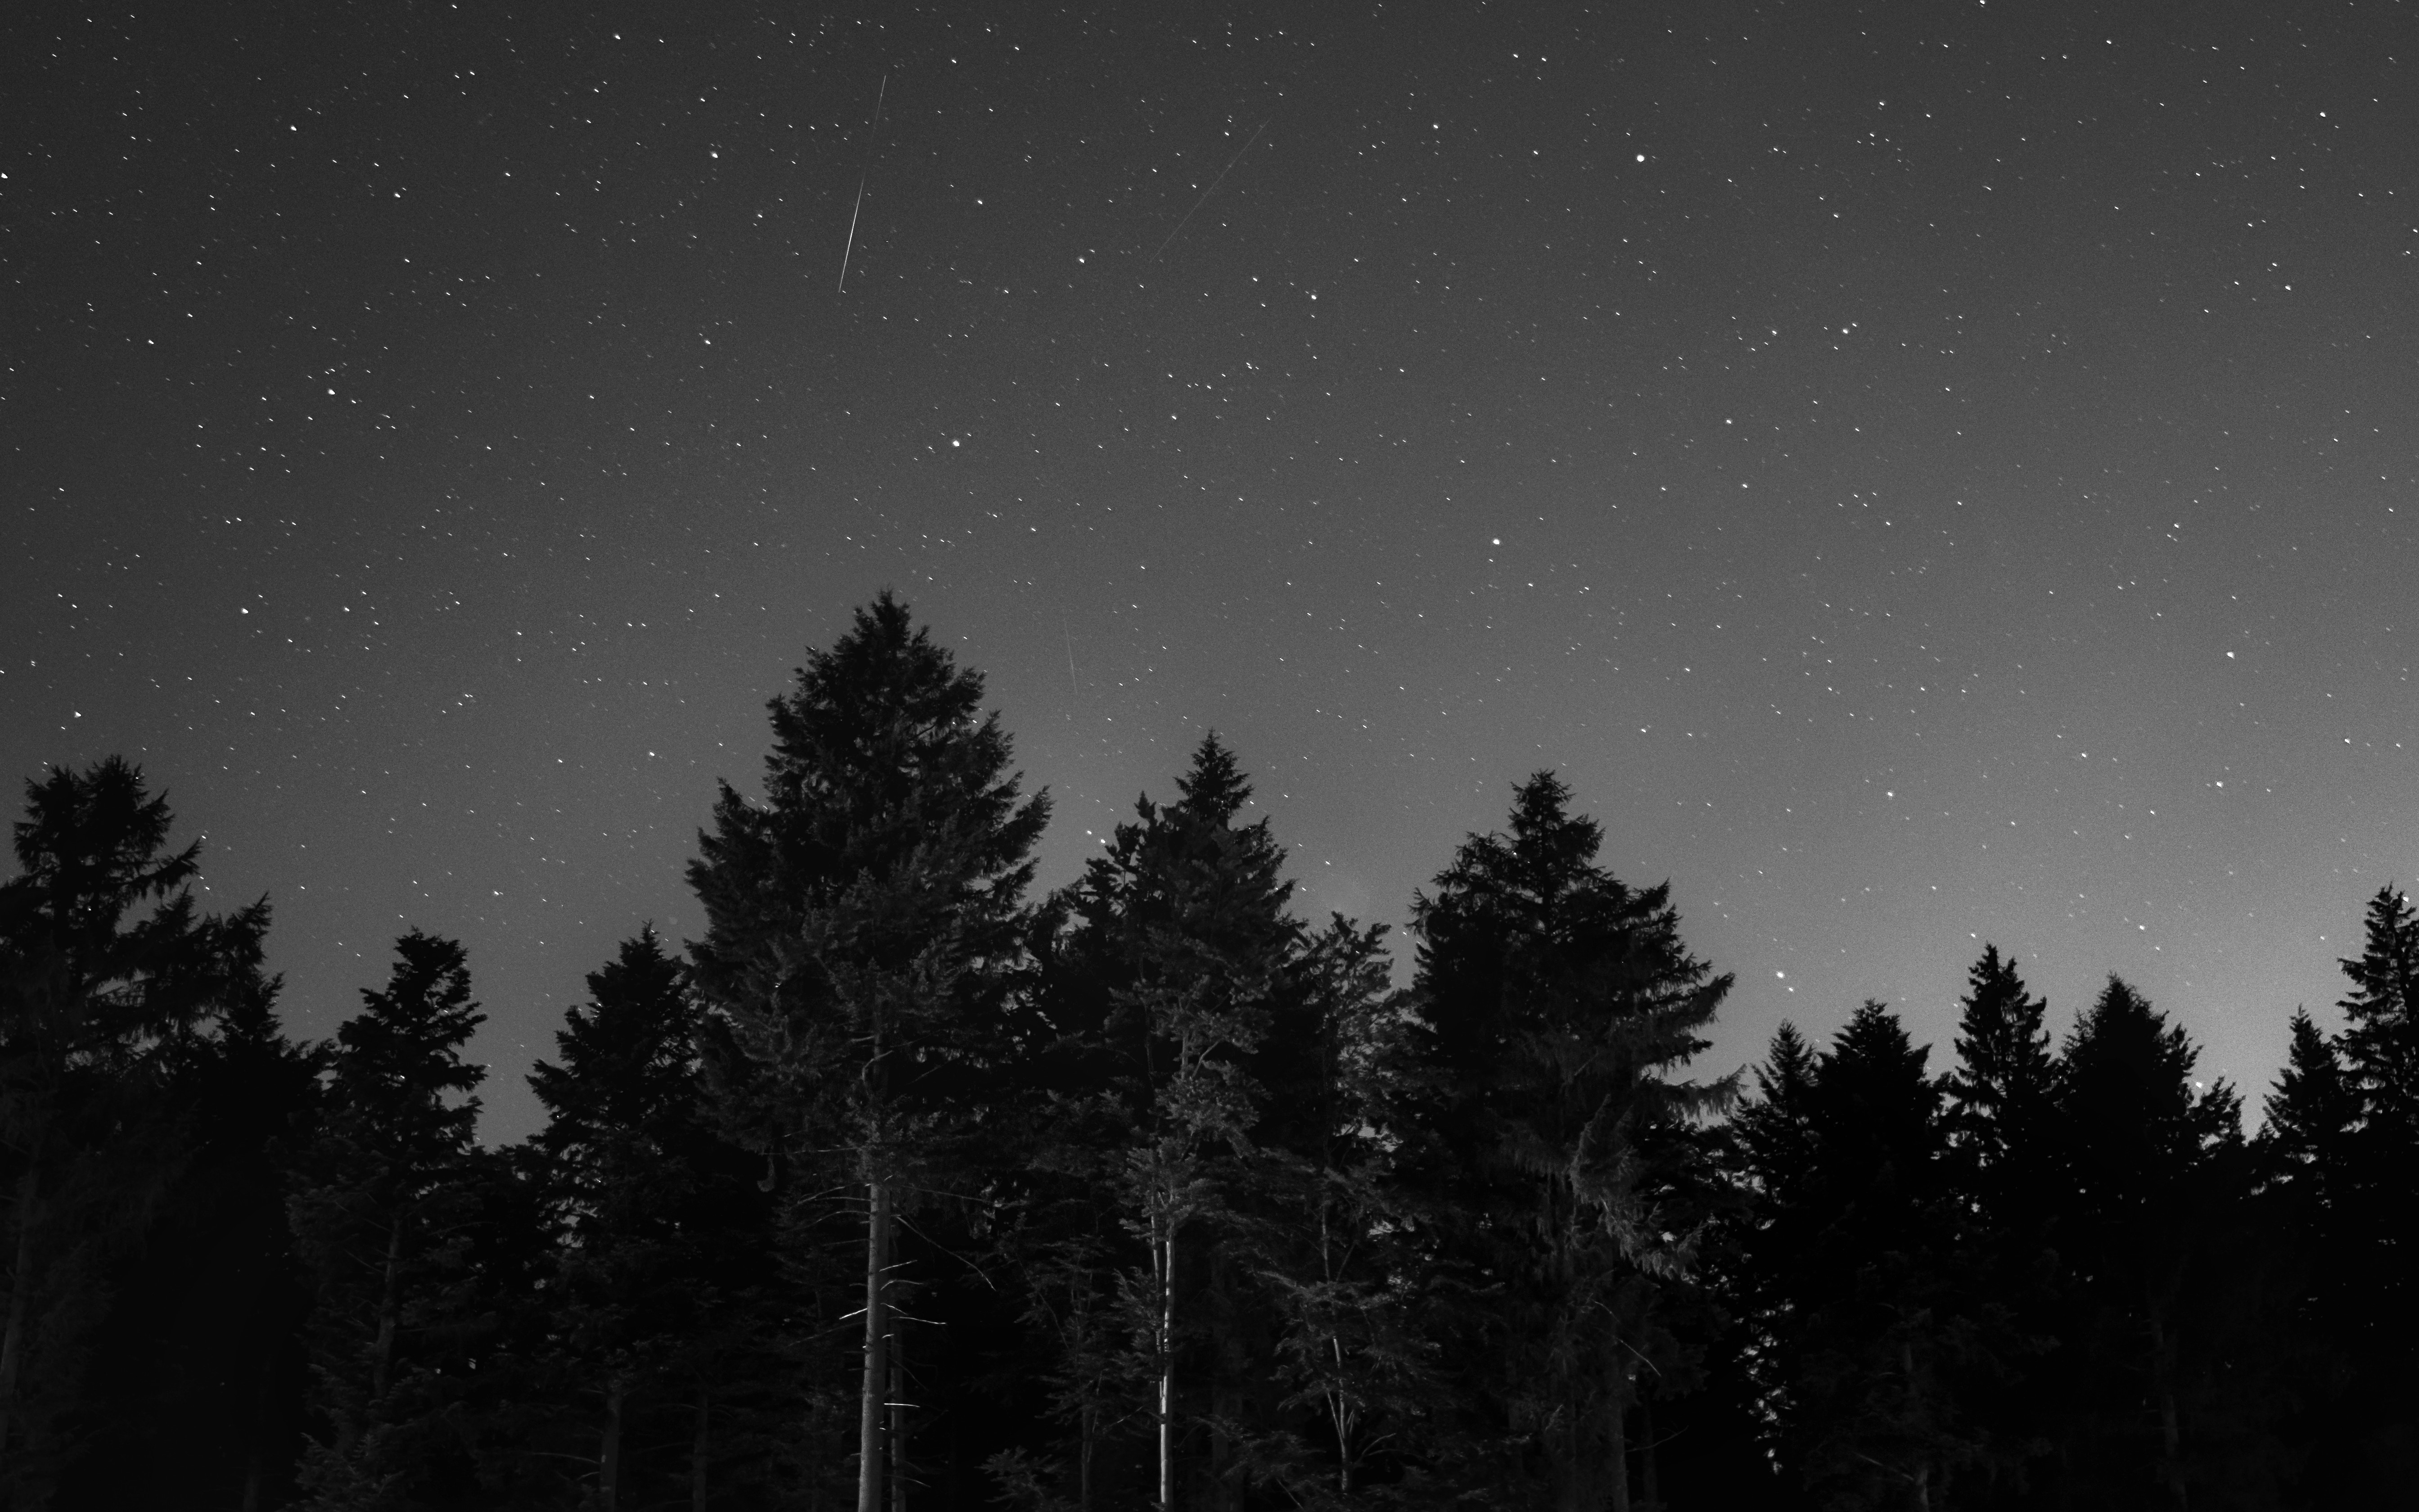 bw, nature, night, starry sky, chb images